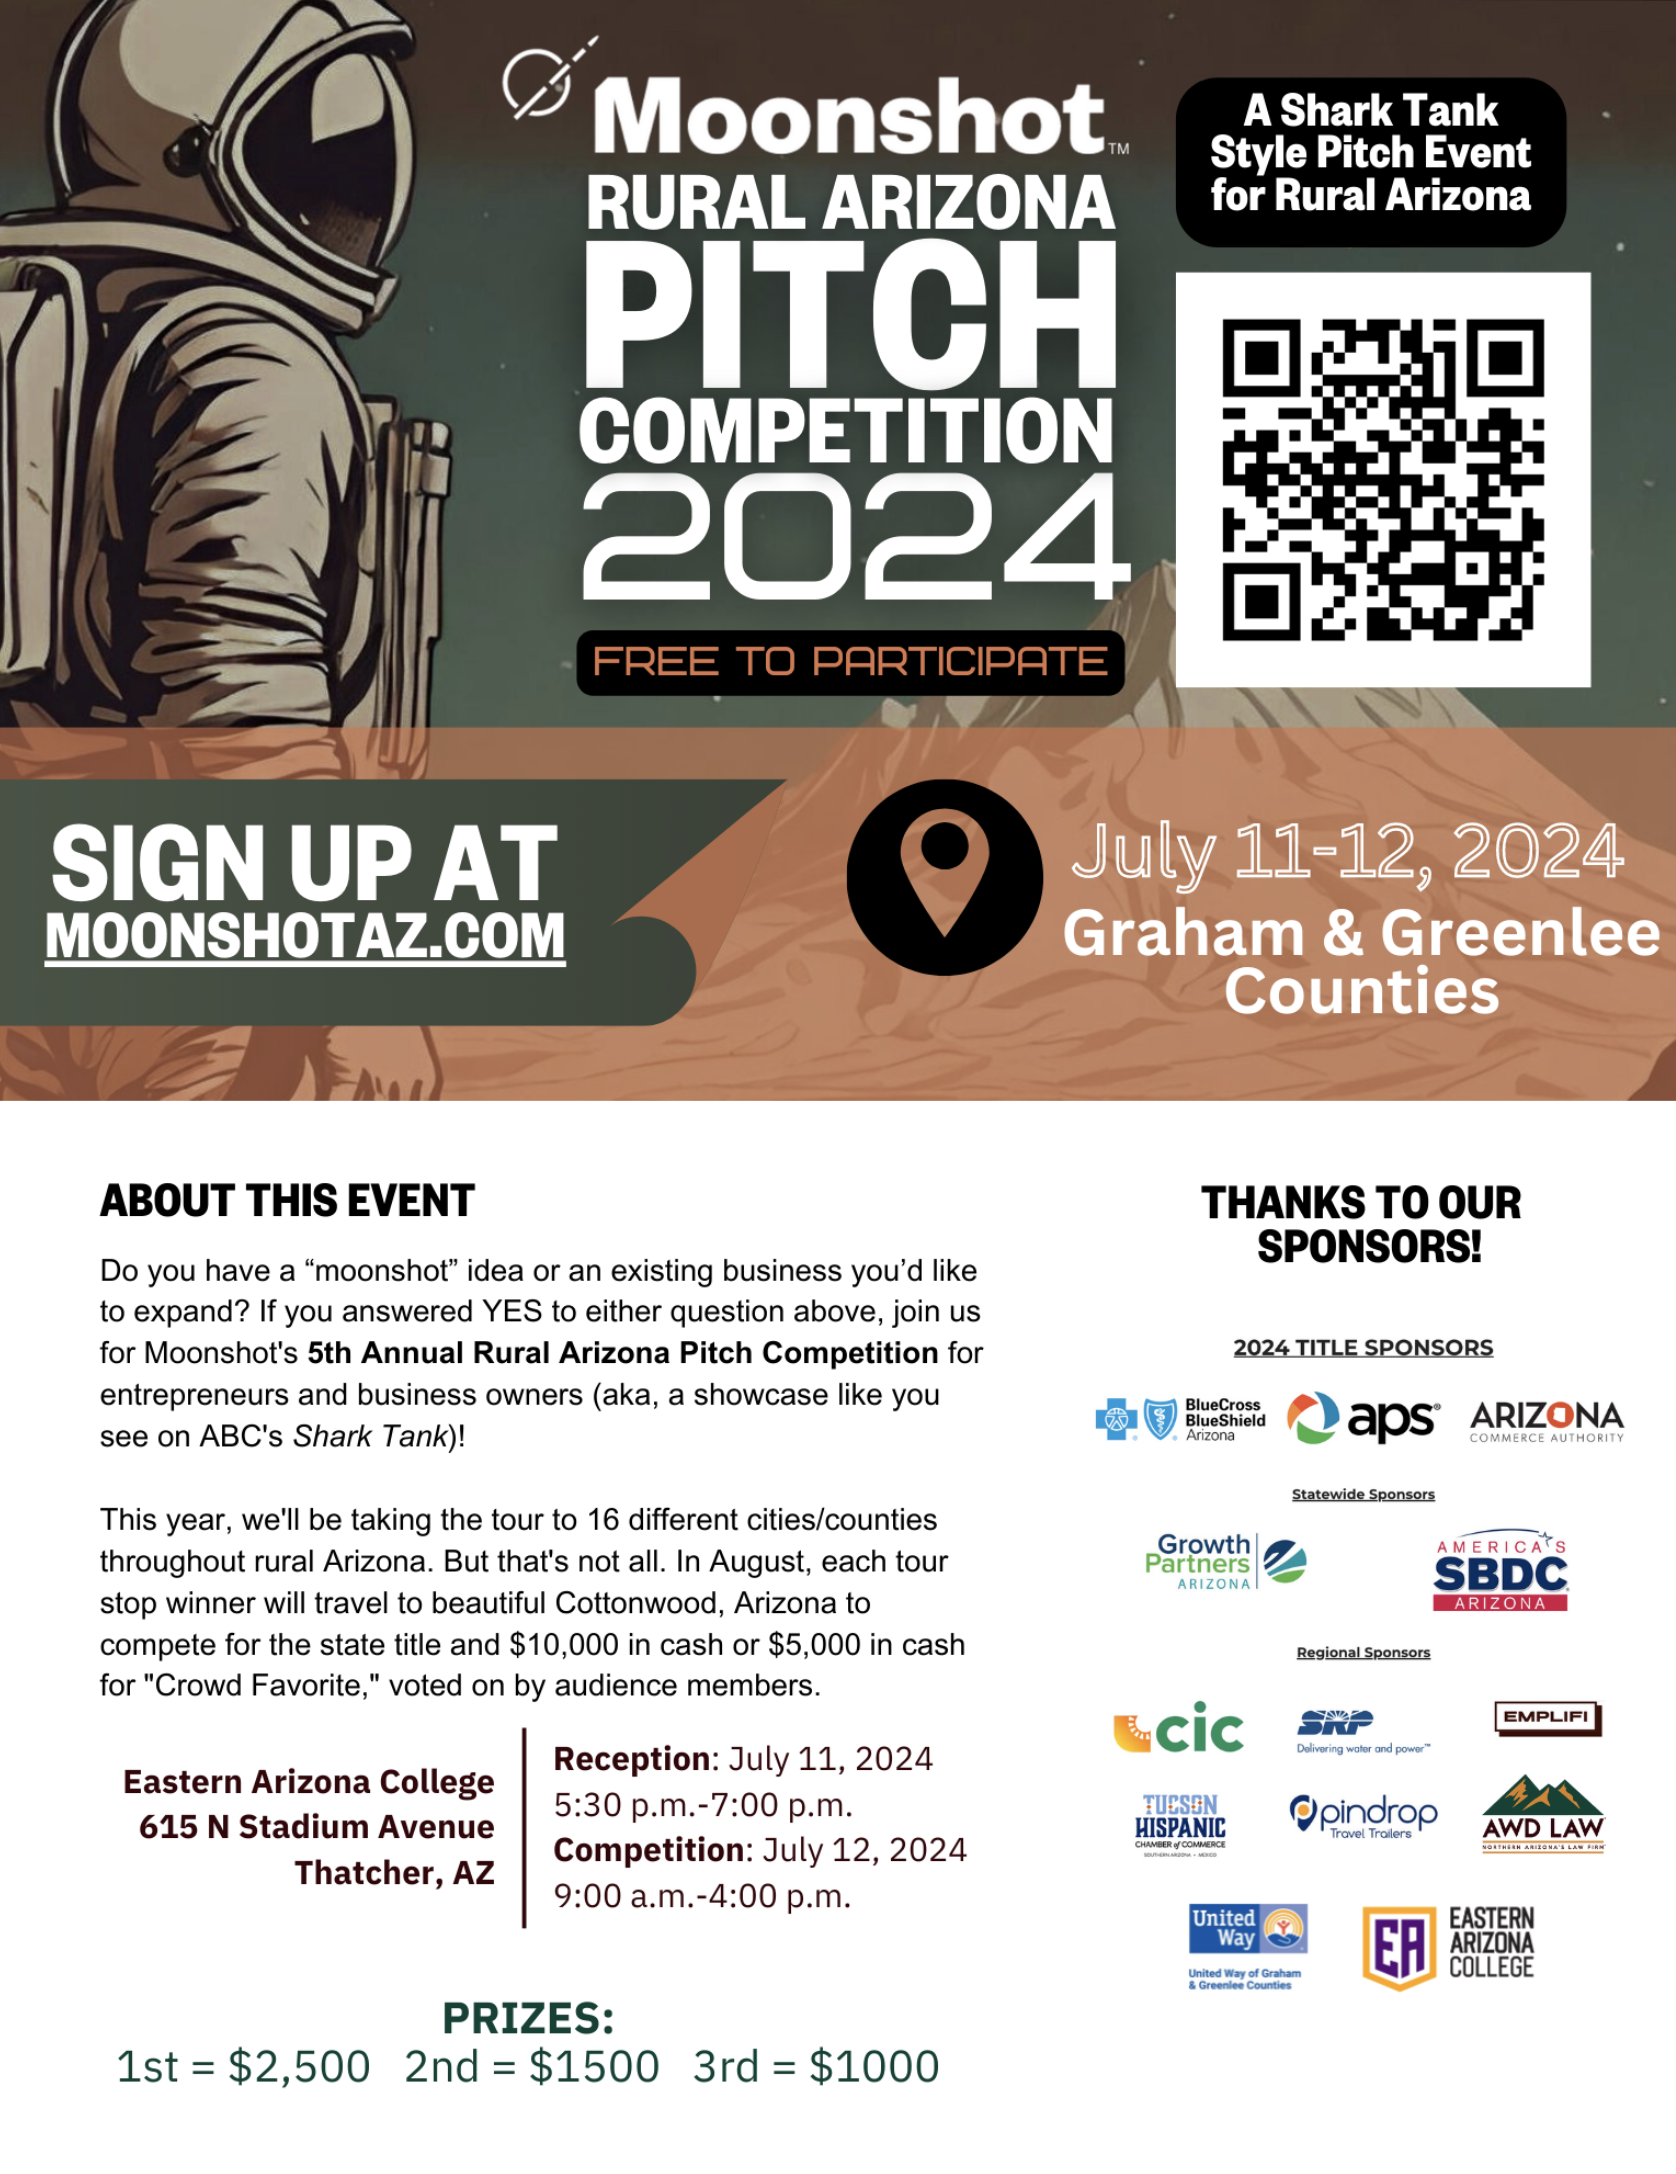 EAC SBDC: Moonshot Pitch Competition